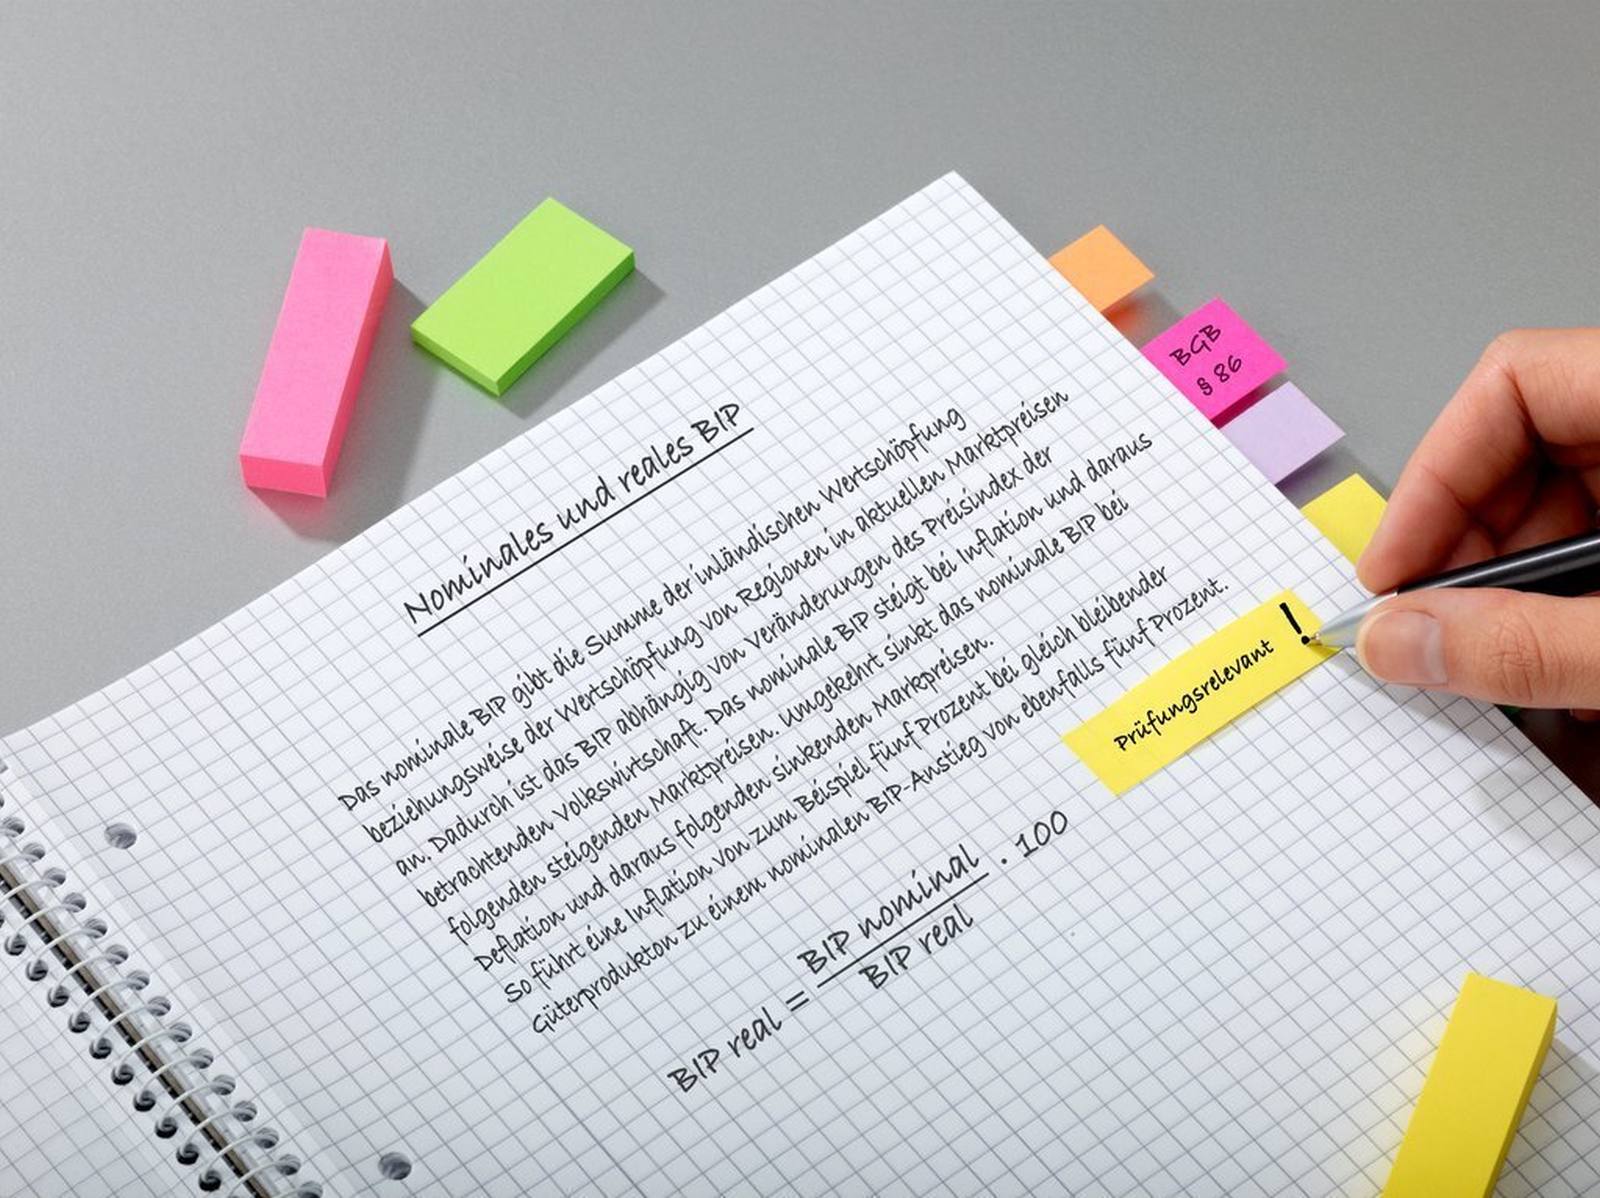 3M Post-it Page marker 671-3, 3 x 100 sheets, wide blocks, neon green, pink, yellow, 25 mm x 76 mm